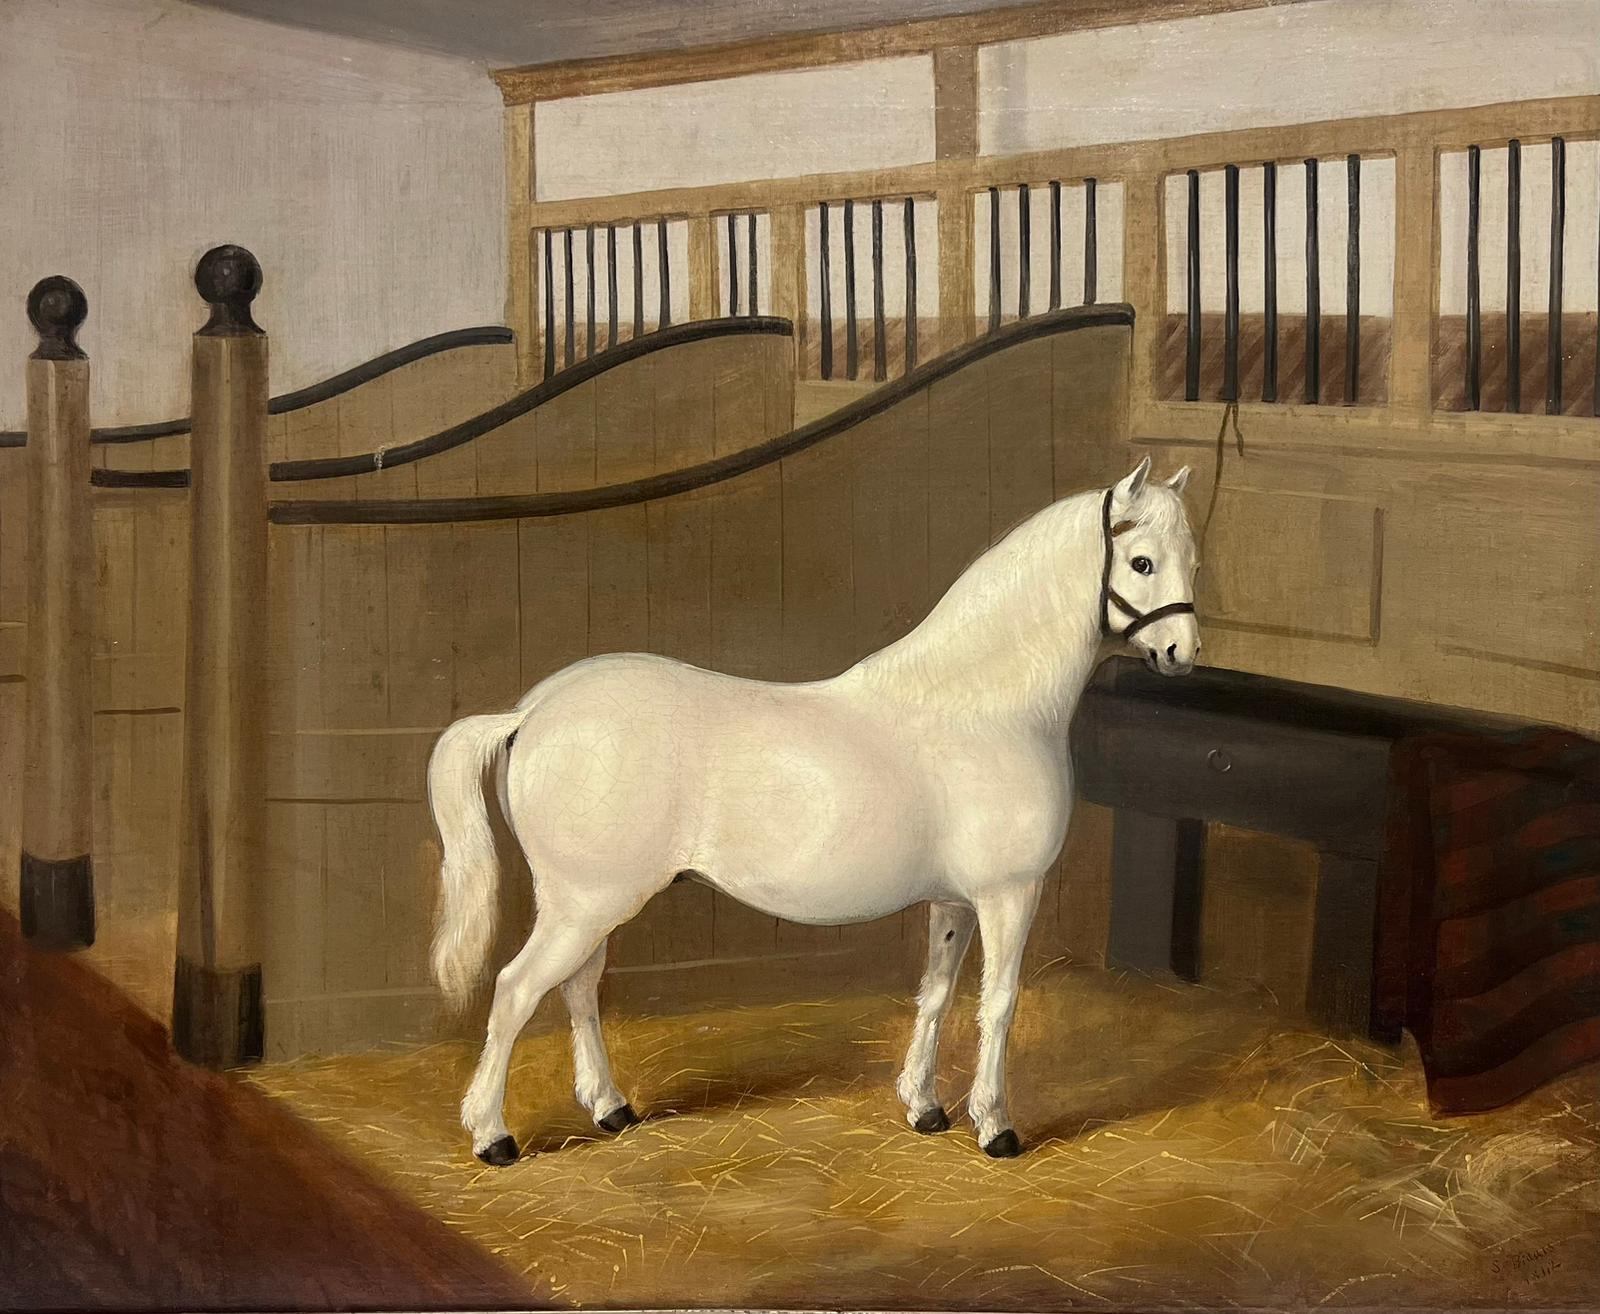 English 1840's Interior Painting - 1840's English Antique Oil Painting White Horse in Stable Interior signed dated